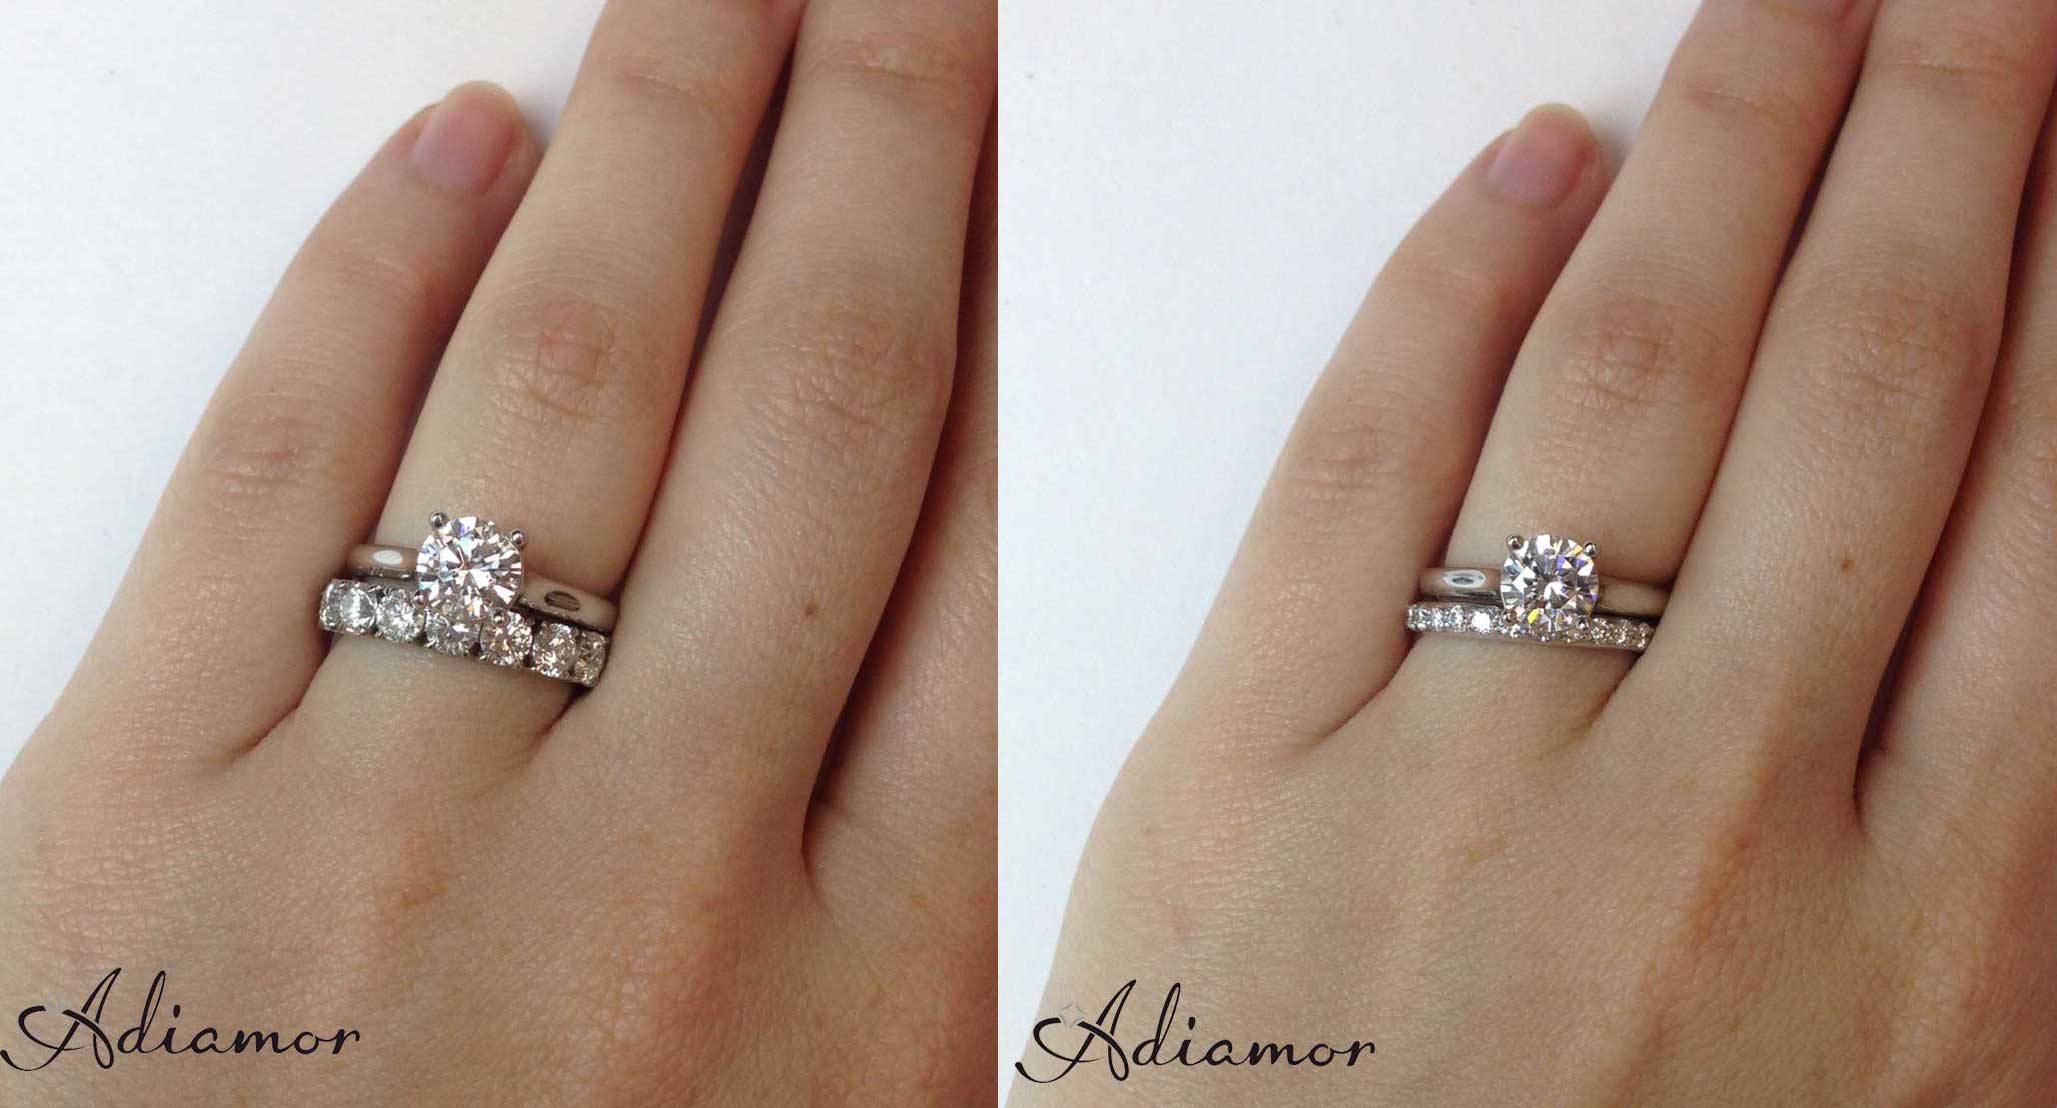 3 ct vs 1 ct eternity band Classic engagement rings